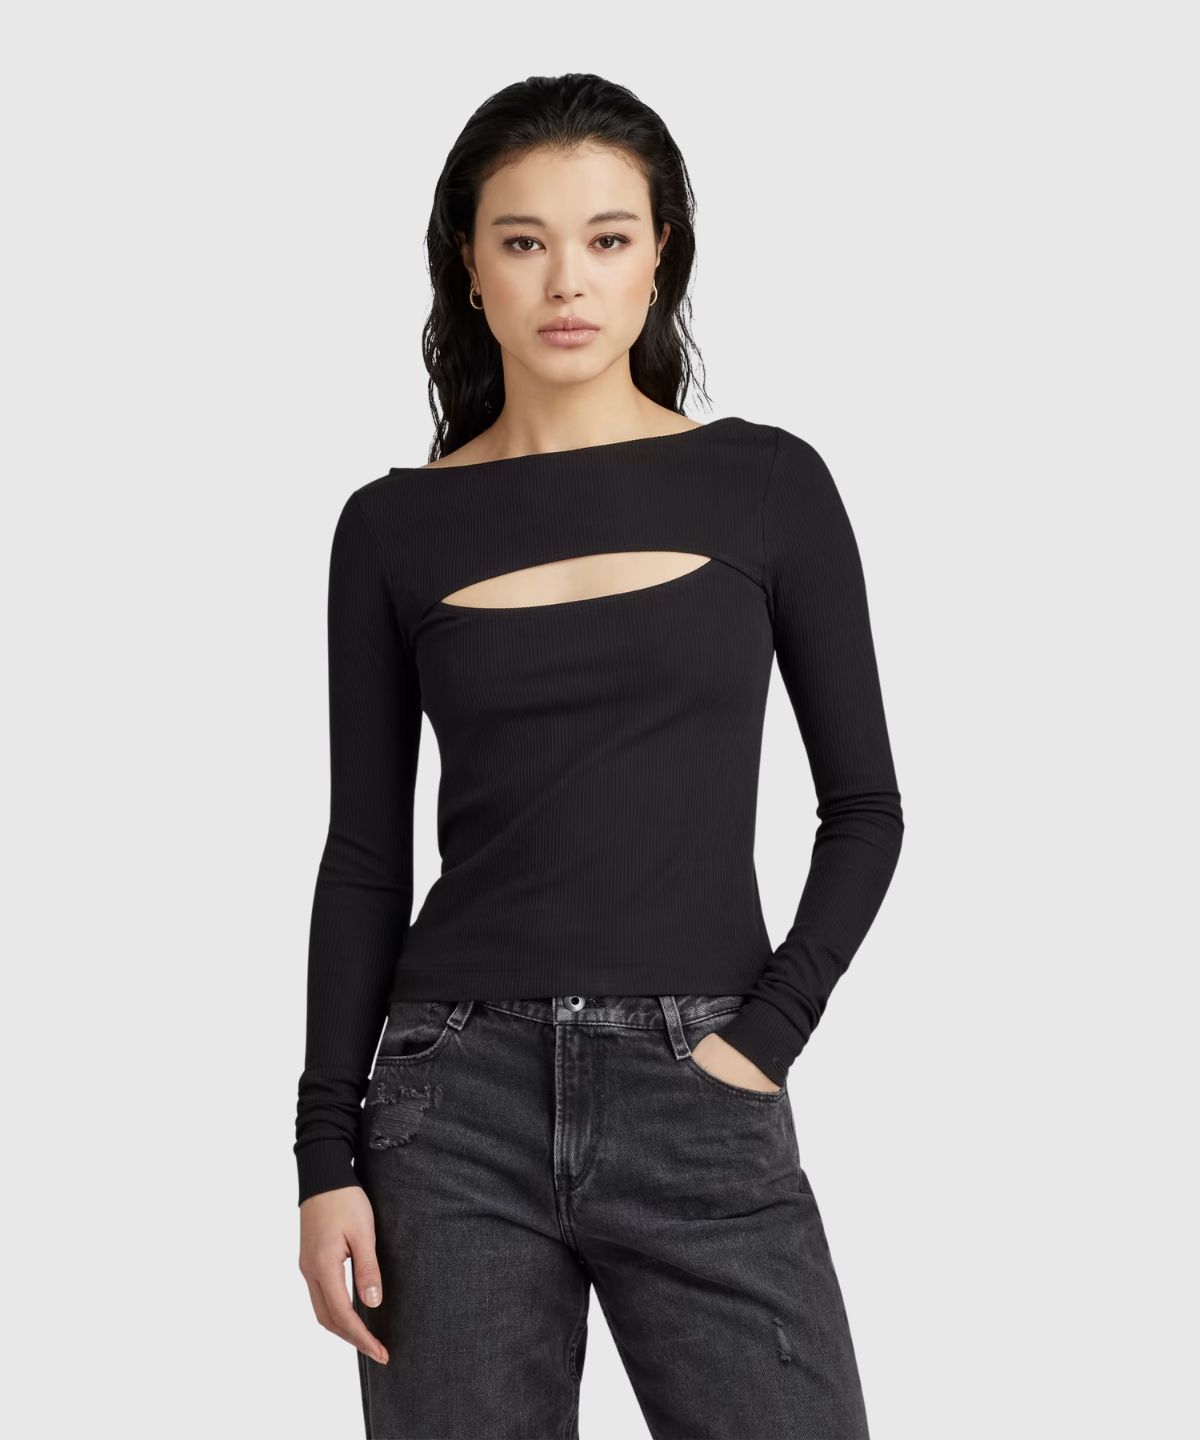 Cut-out slim boat t wmn